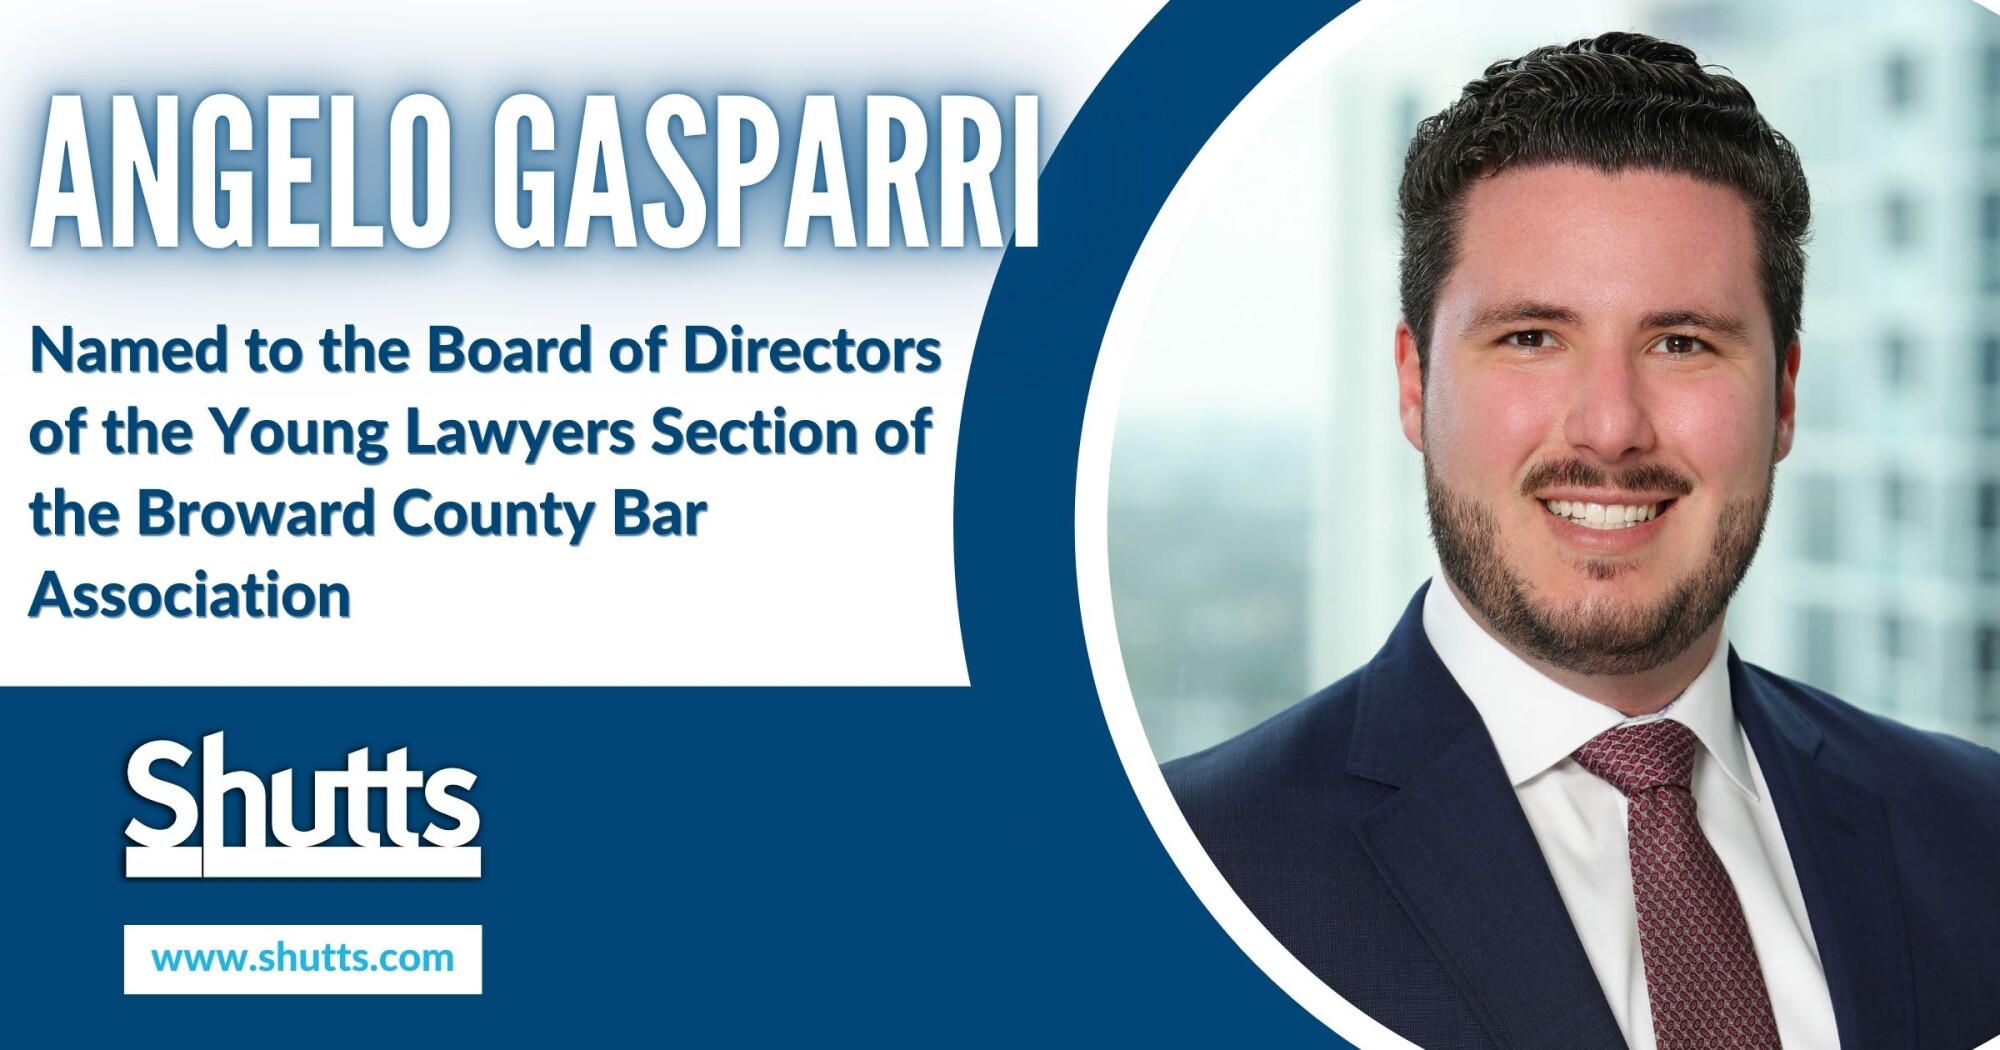 Angelo Gasparri Named to the Board of Directors of the Young Lawyers Section of the Broward County Bar Association